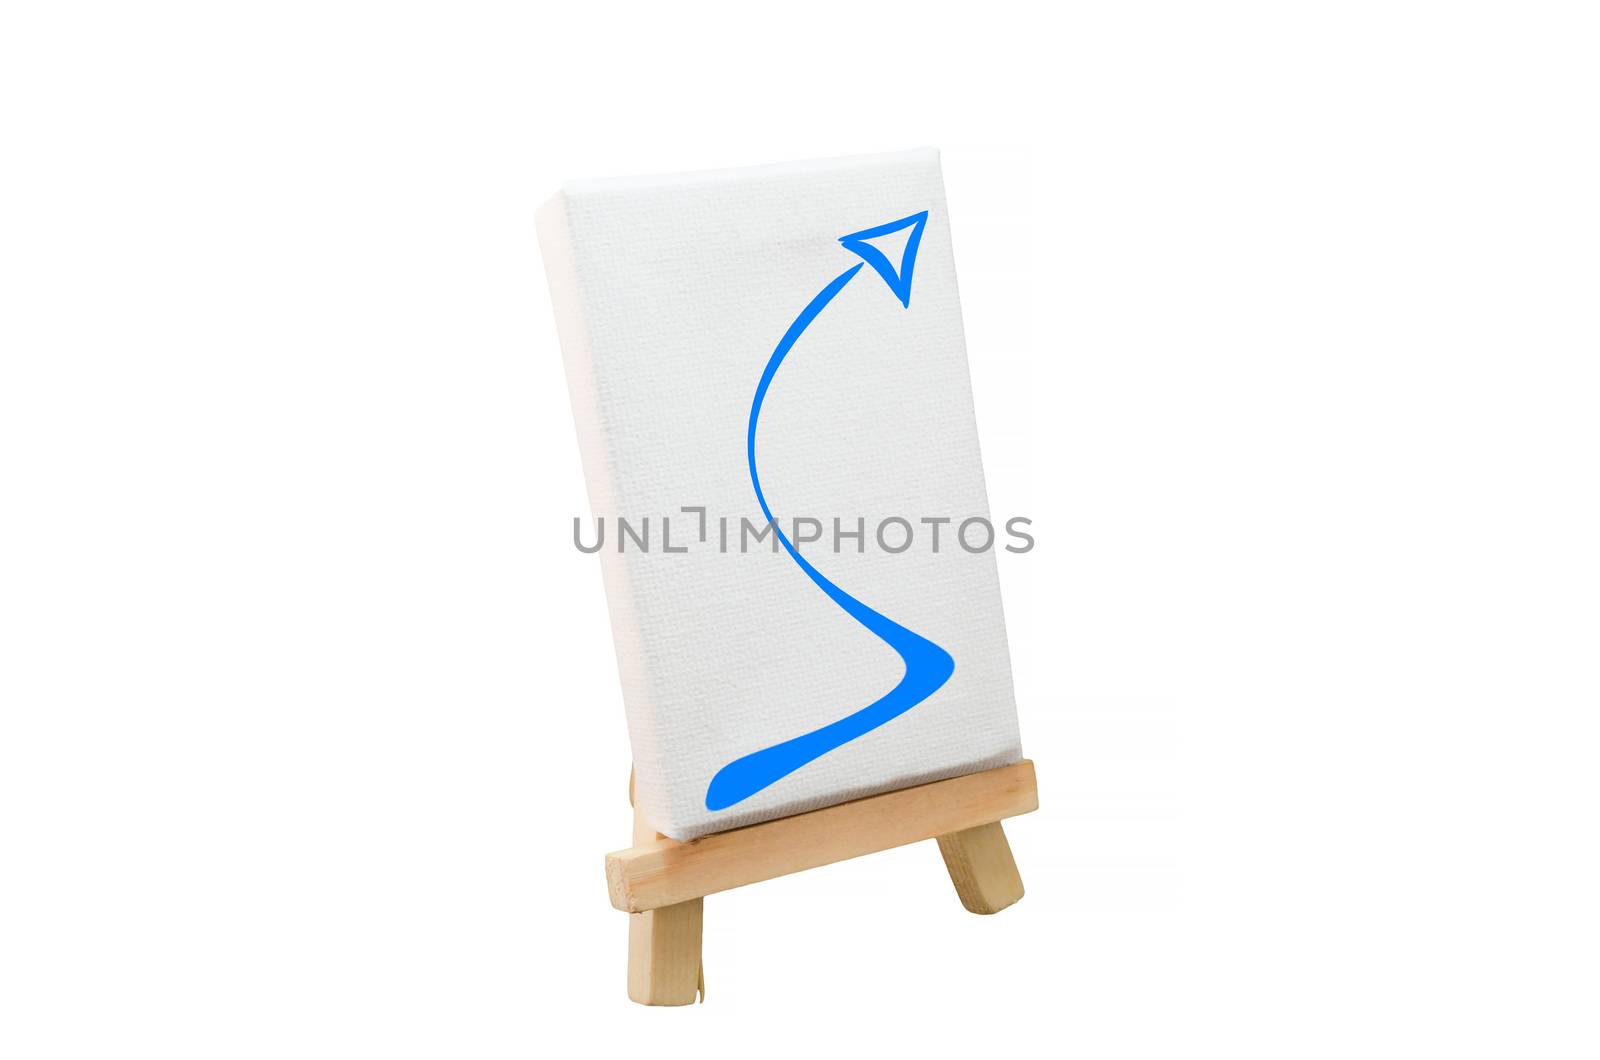 Artist Easel with arrow illustration by JFsPic